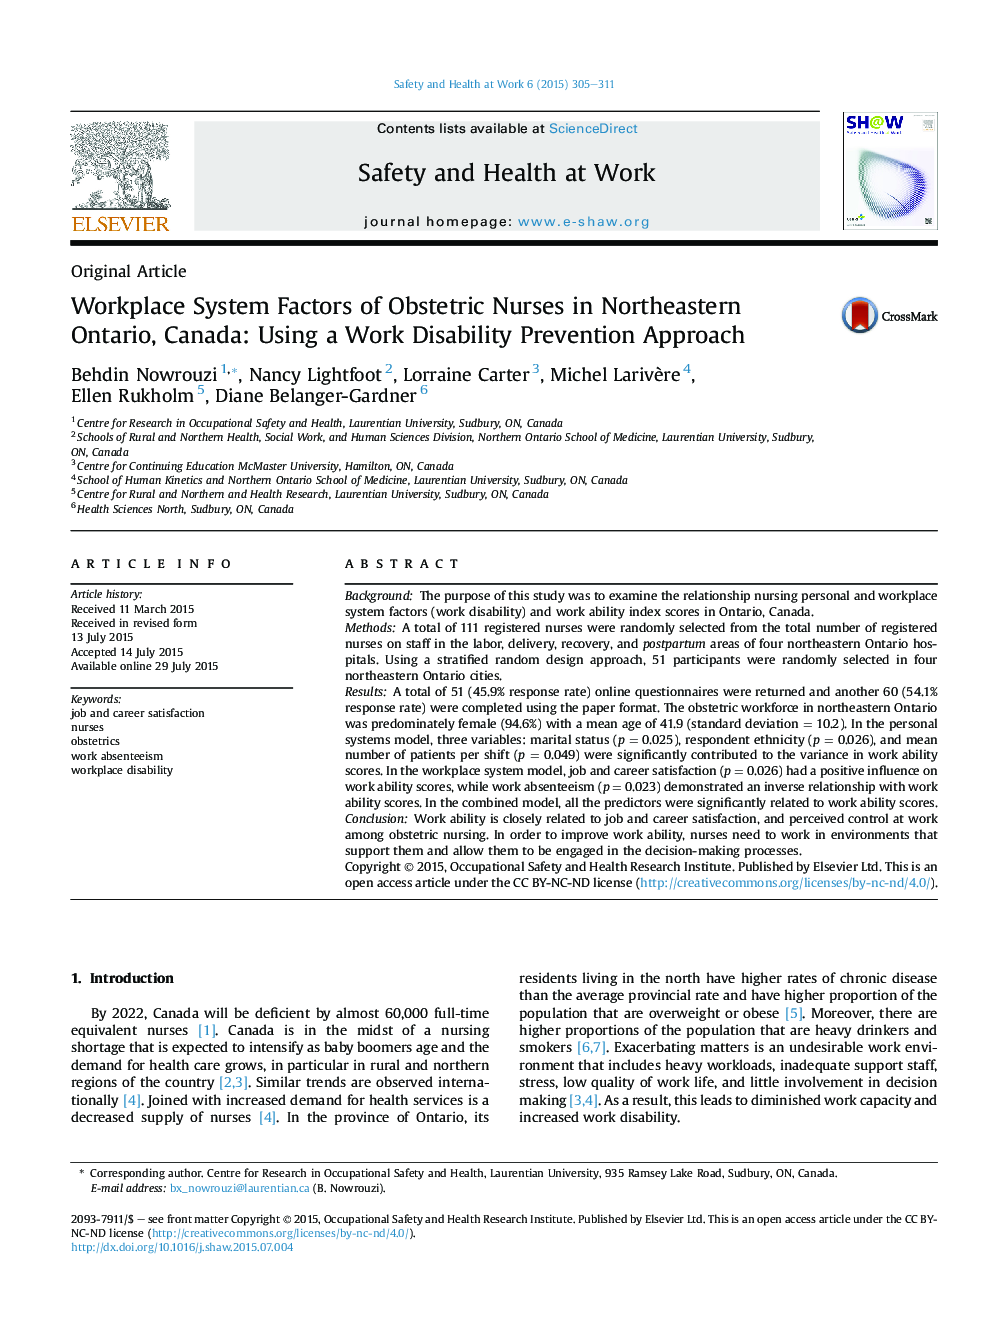 Workplace System Factors of Obstetric Nurses in Northeastern Ontario, Canada: Using a Work Disability Prevention Approach 